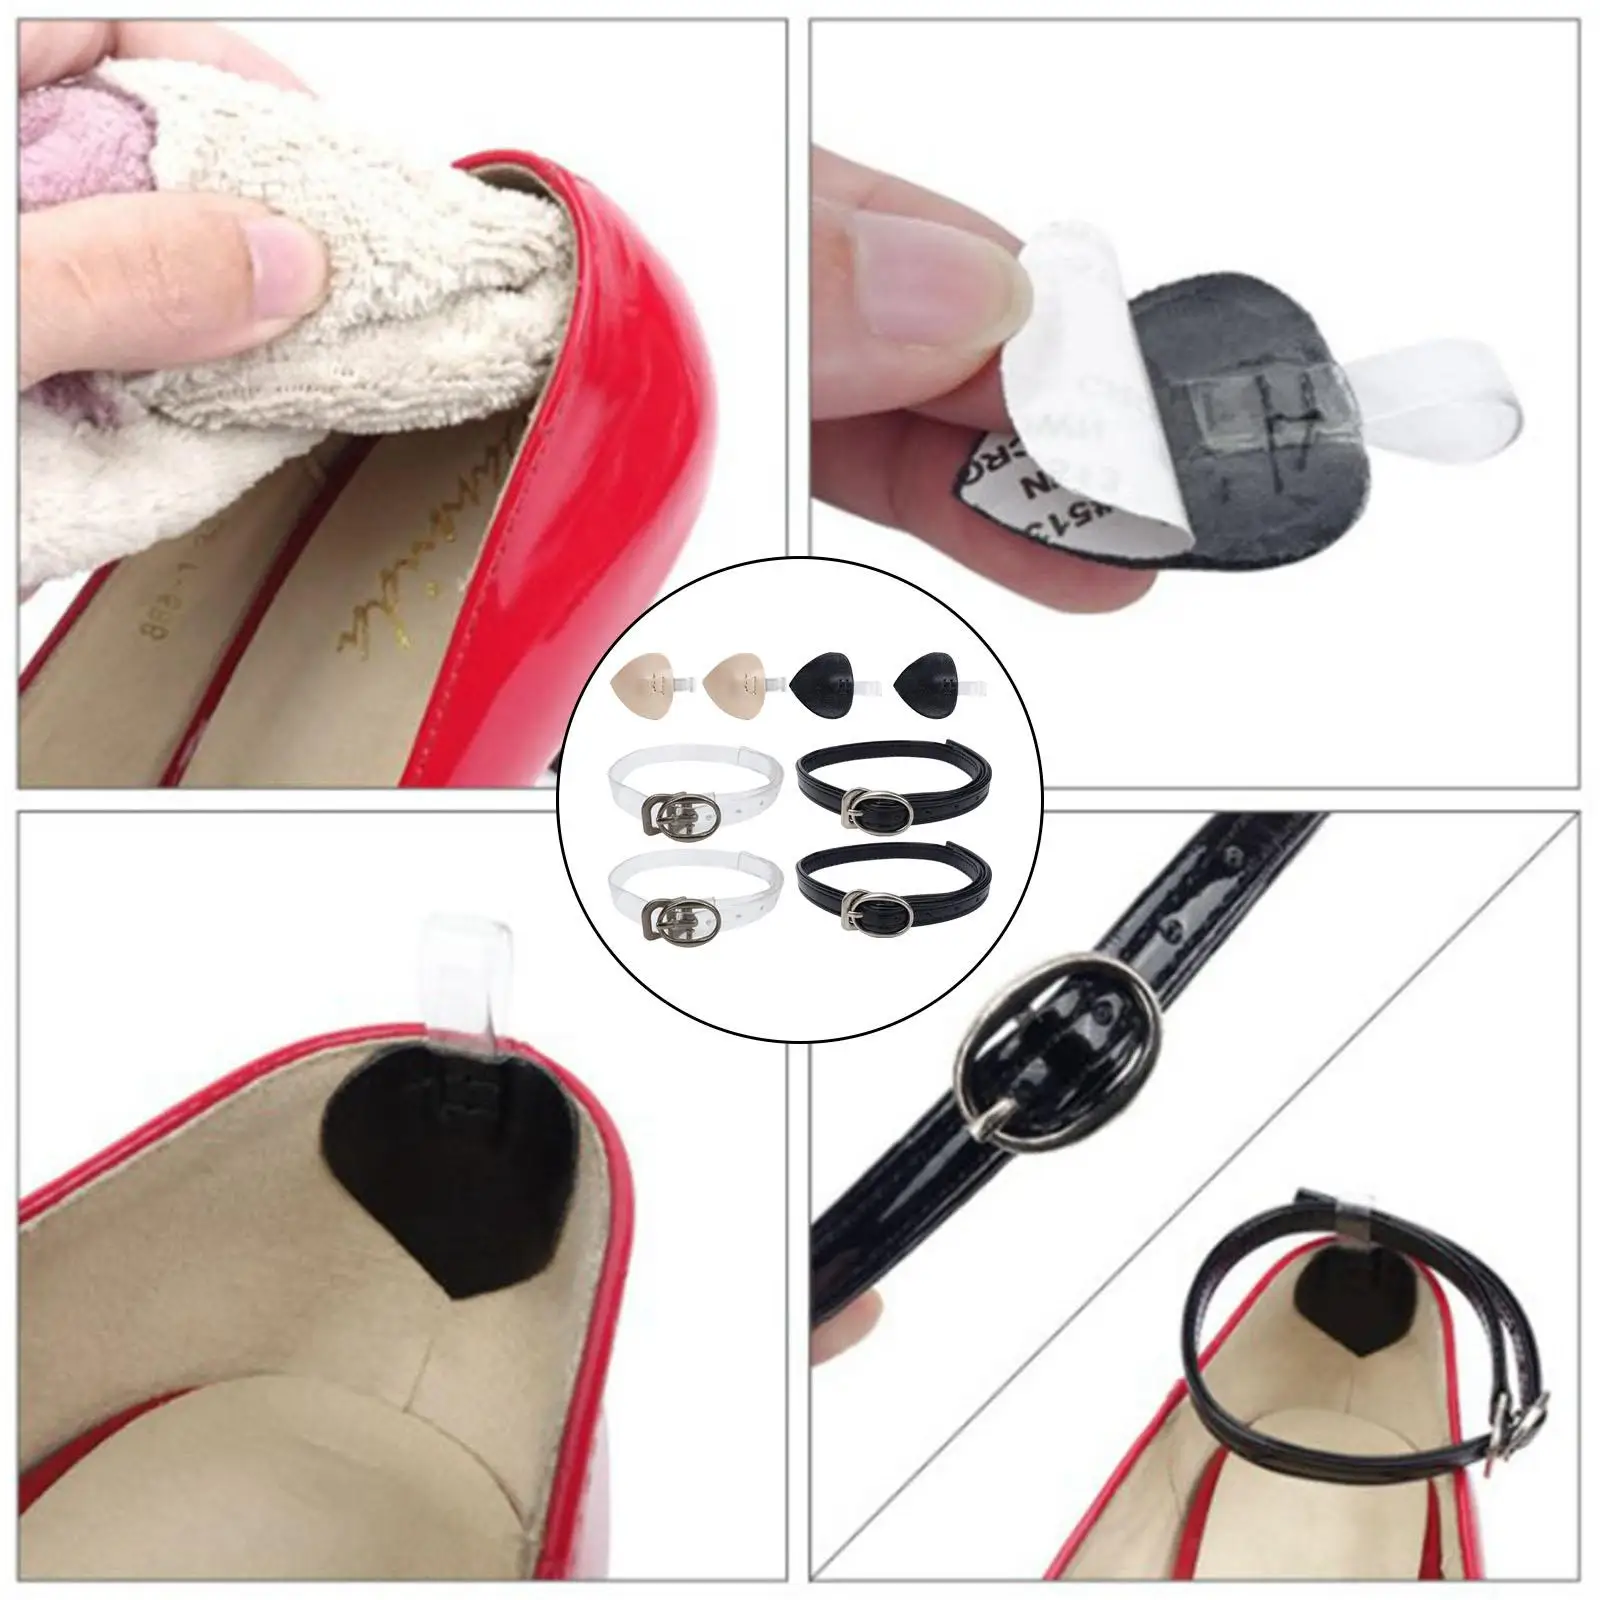 1 Pair Detachable High Heels Anti Slip Shoe Straps Anti-Skid Decor Band Ankle Shoelace Strap for Holding Loose High Heels Shoes